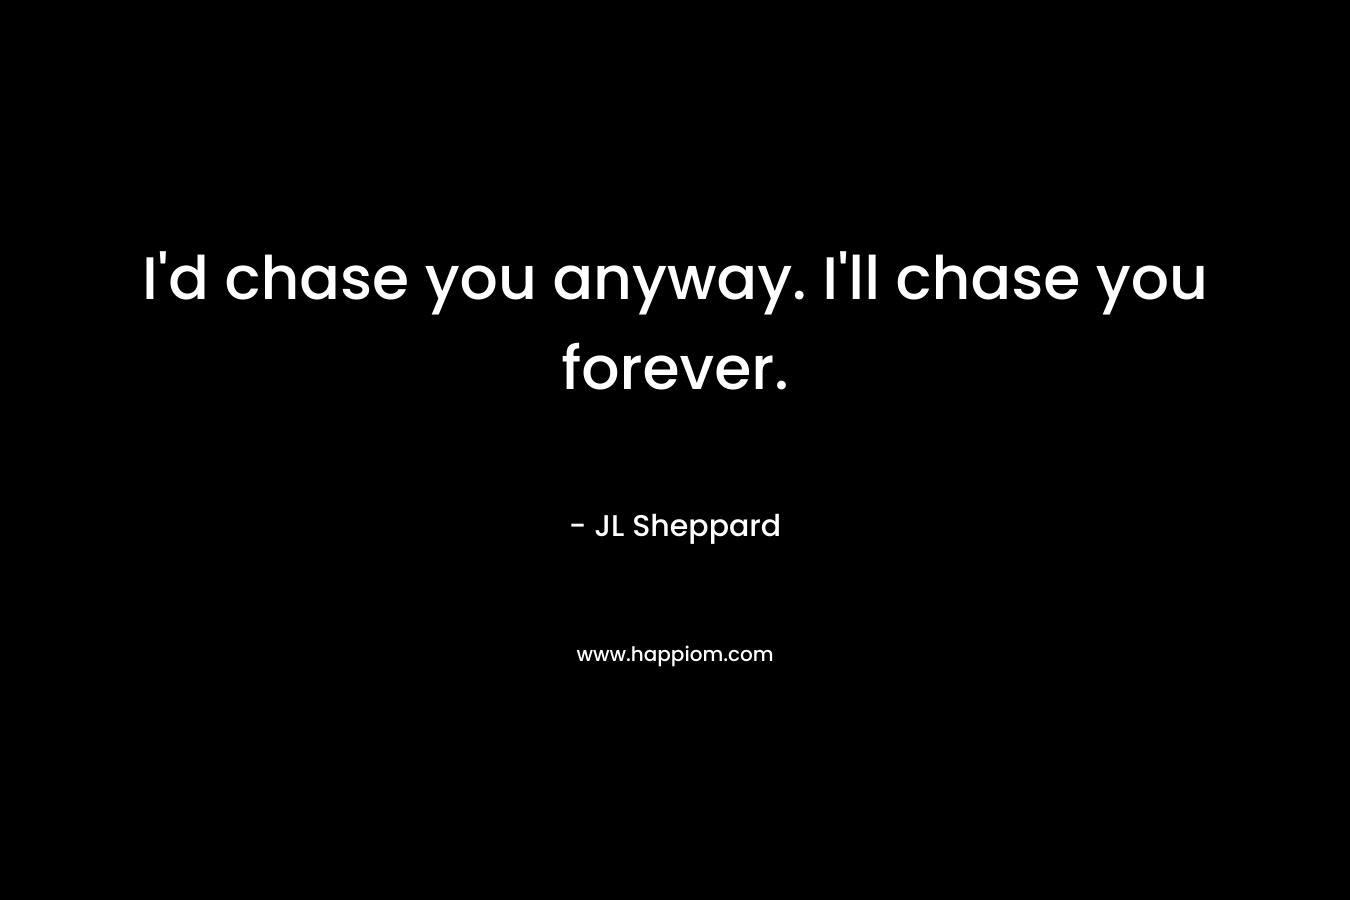 I'd chase you anyway. I'll chase you forever.